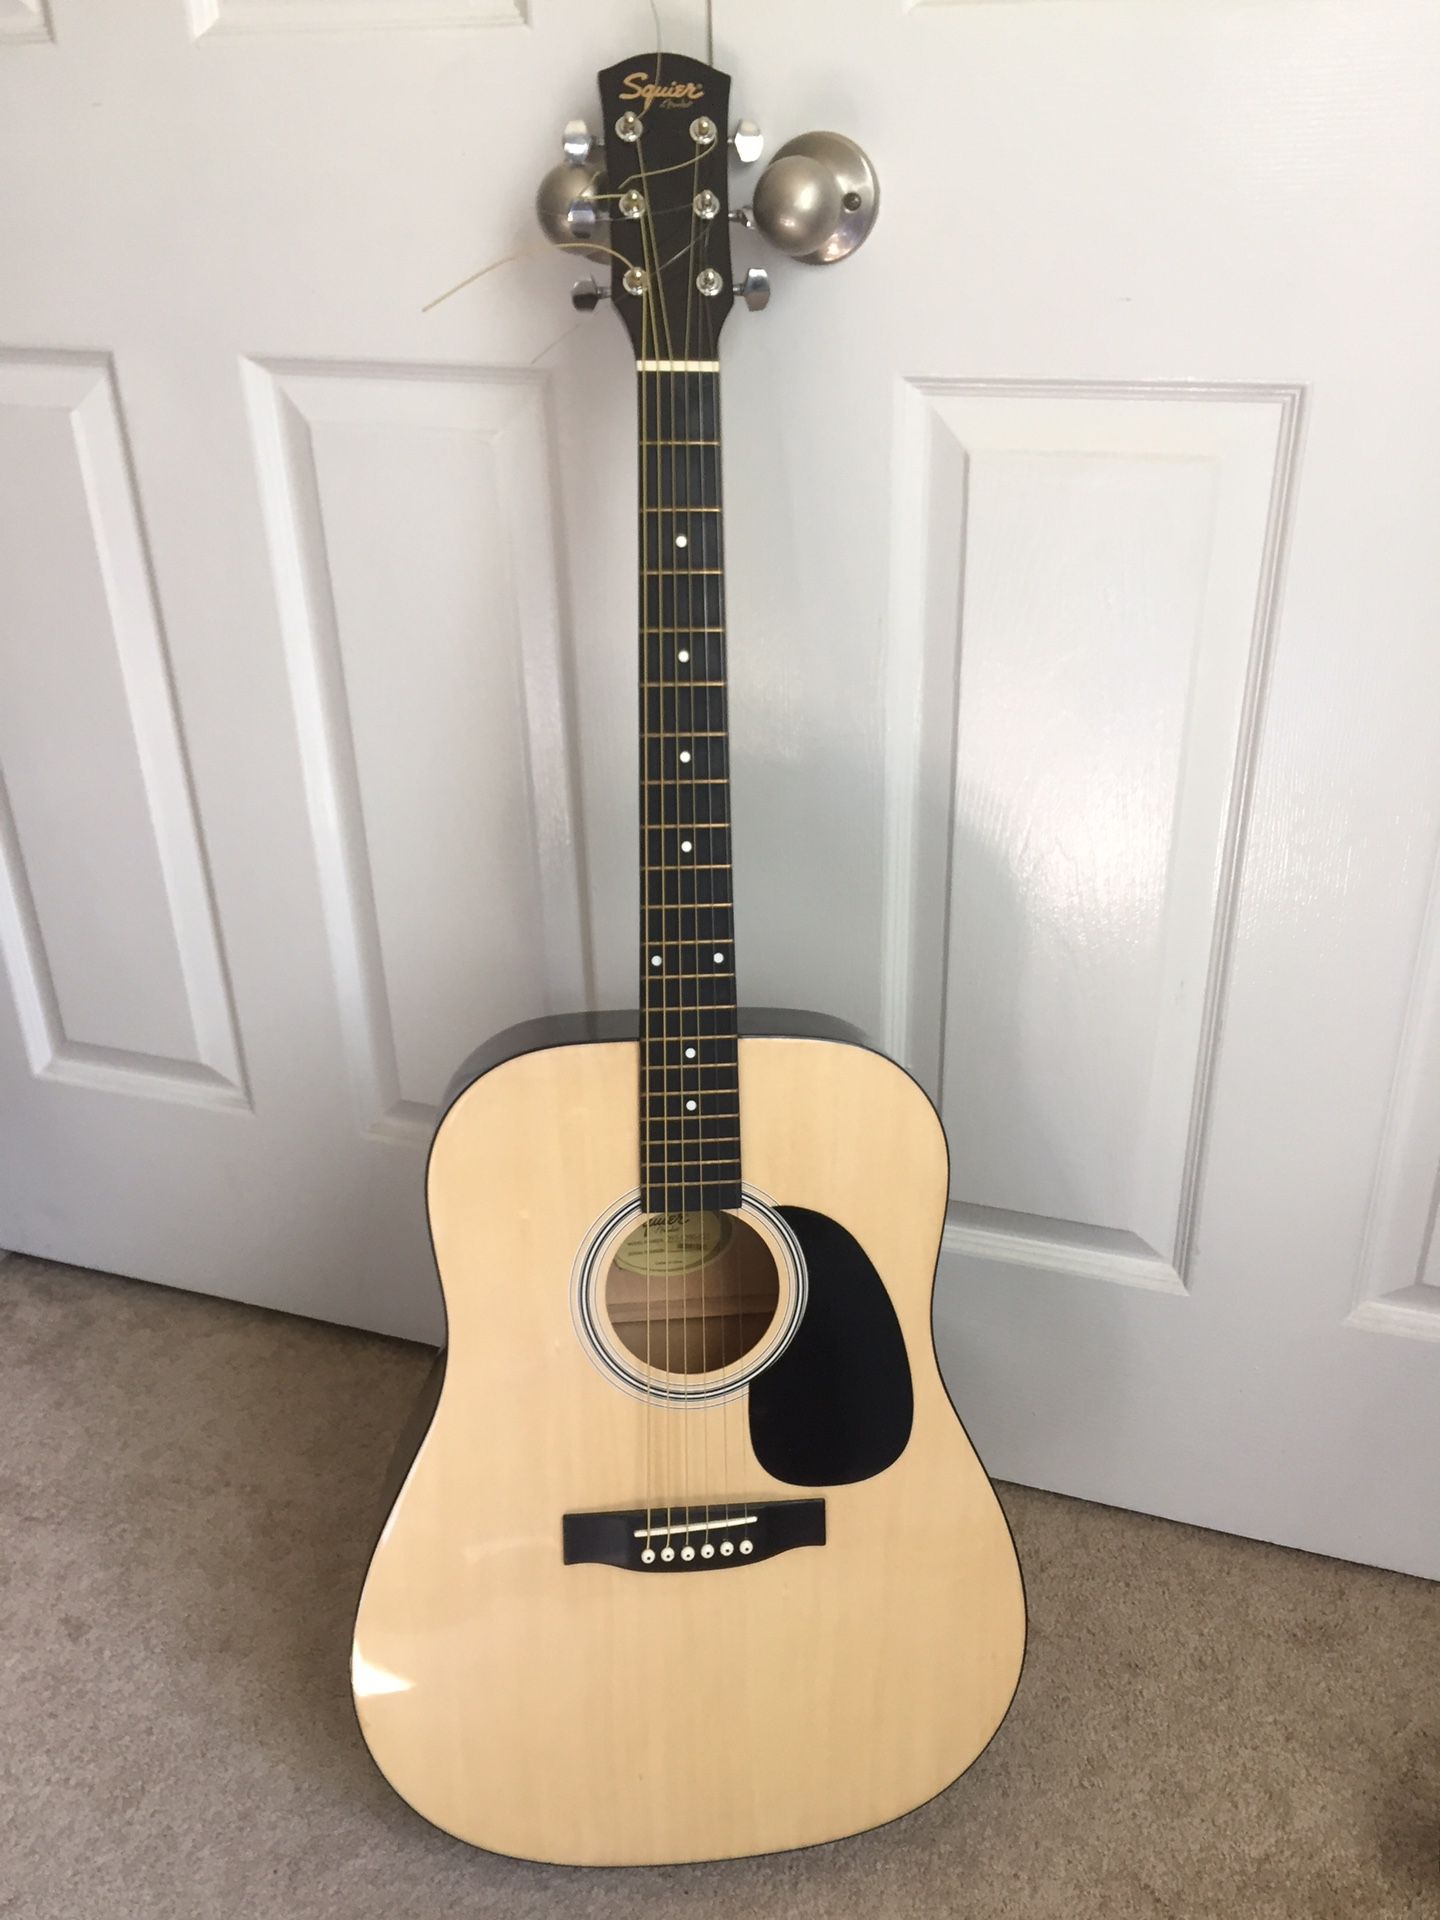 Squire acoustic guitar w/gig bag